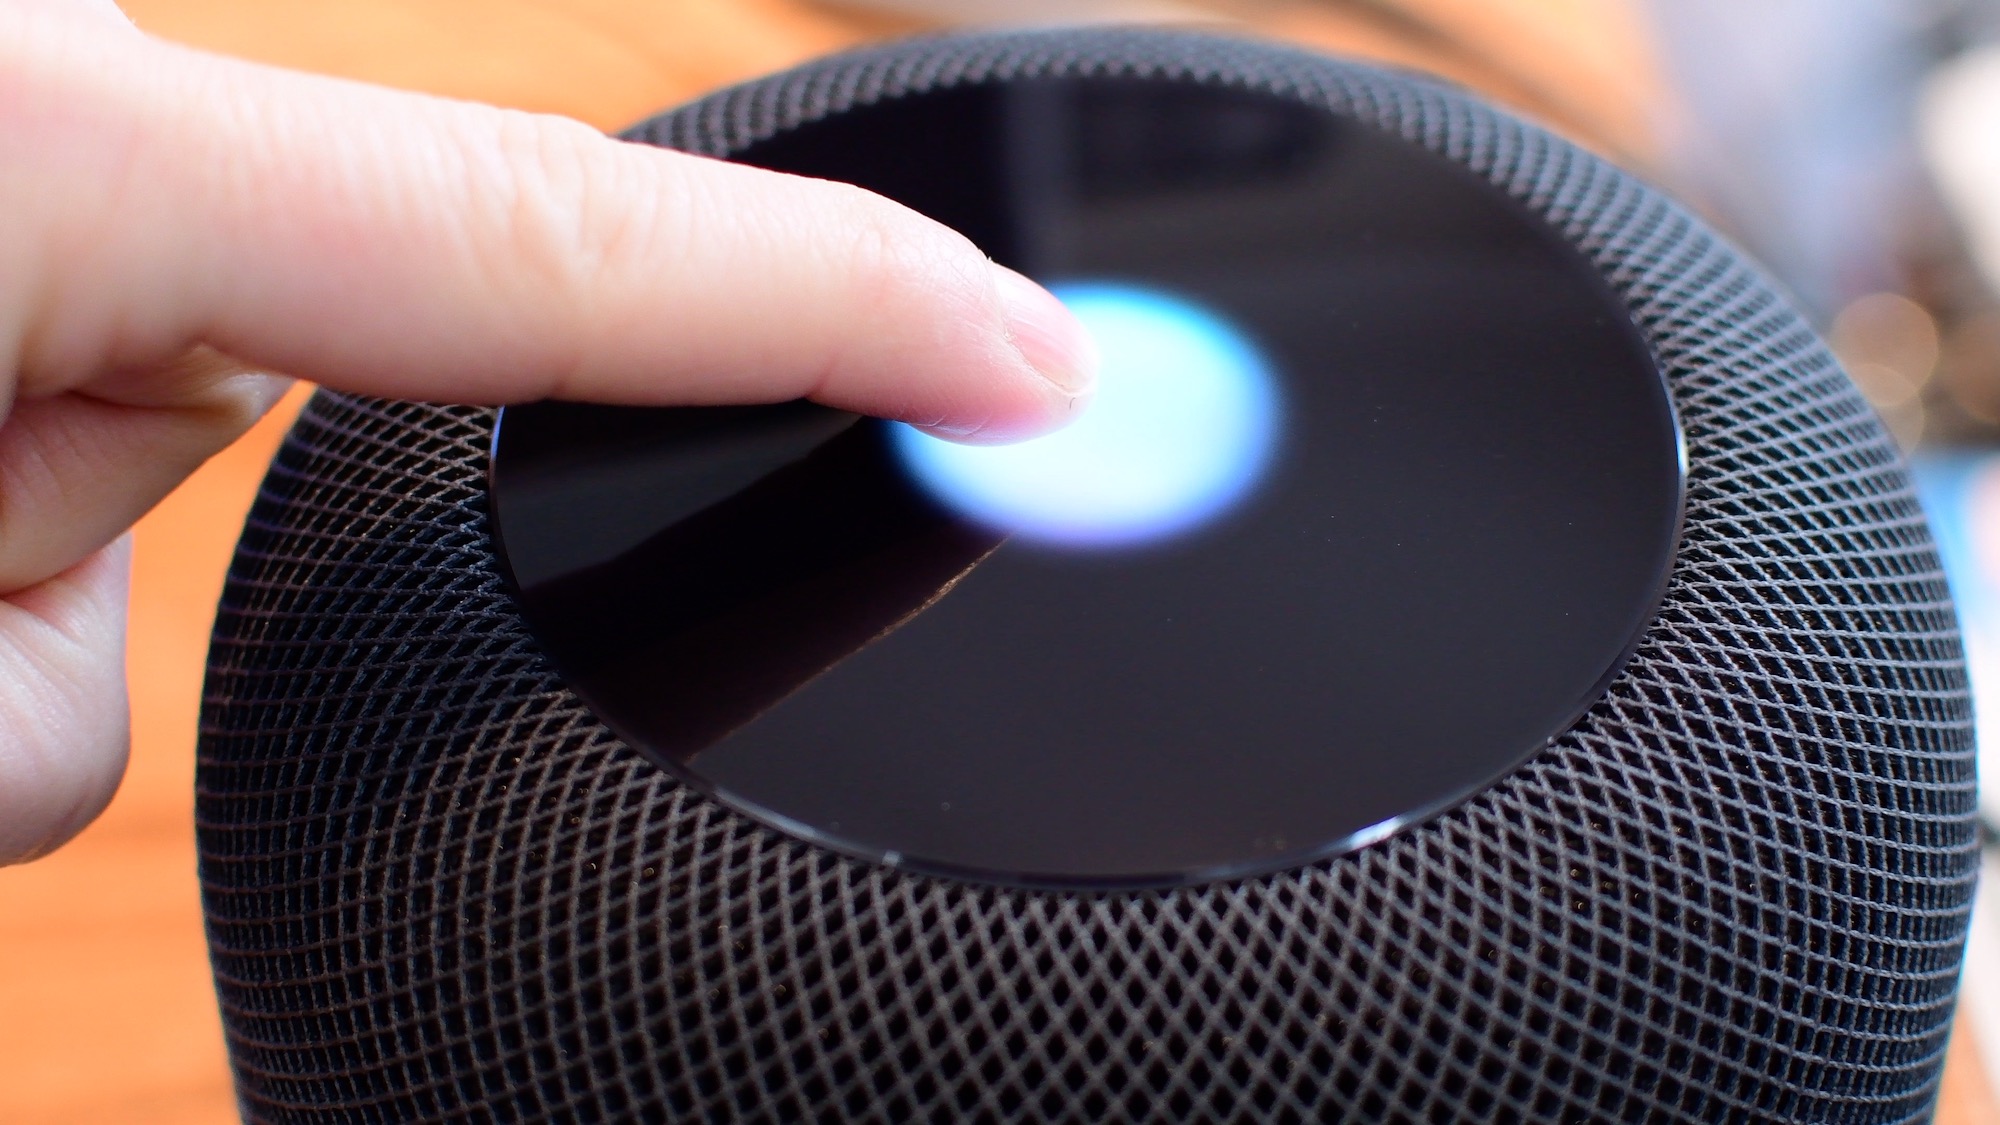 HomePod update 17.3 release notes: Bug fixes and performance improvements